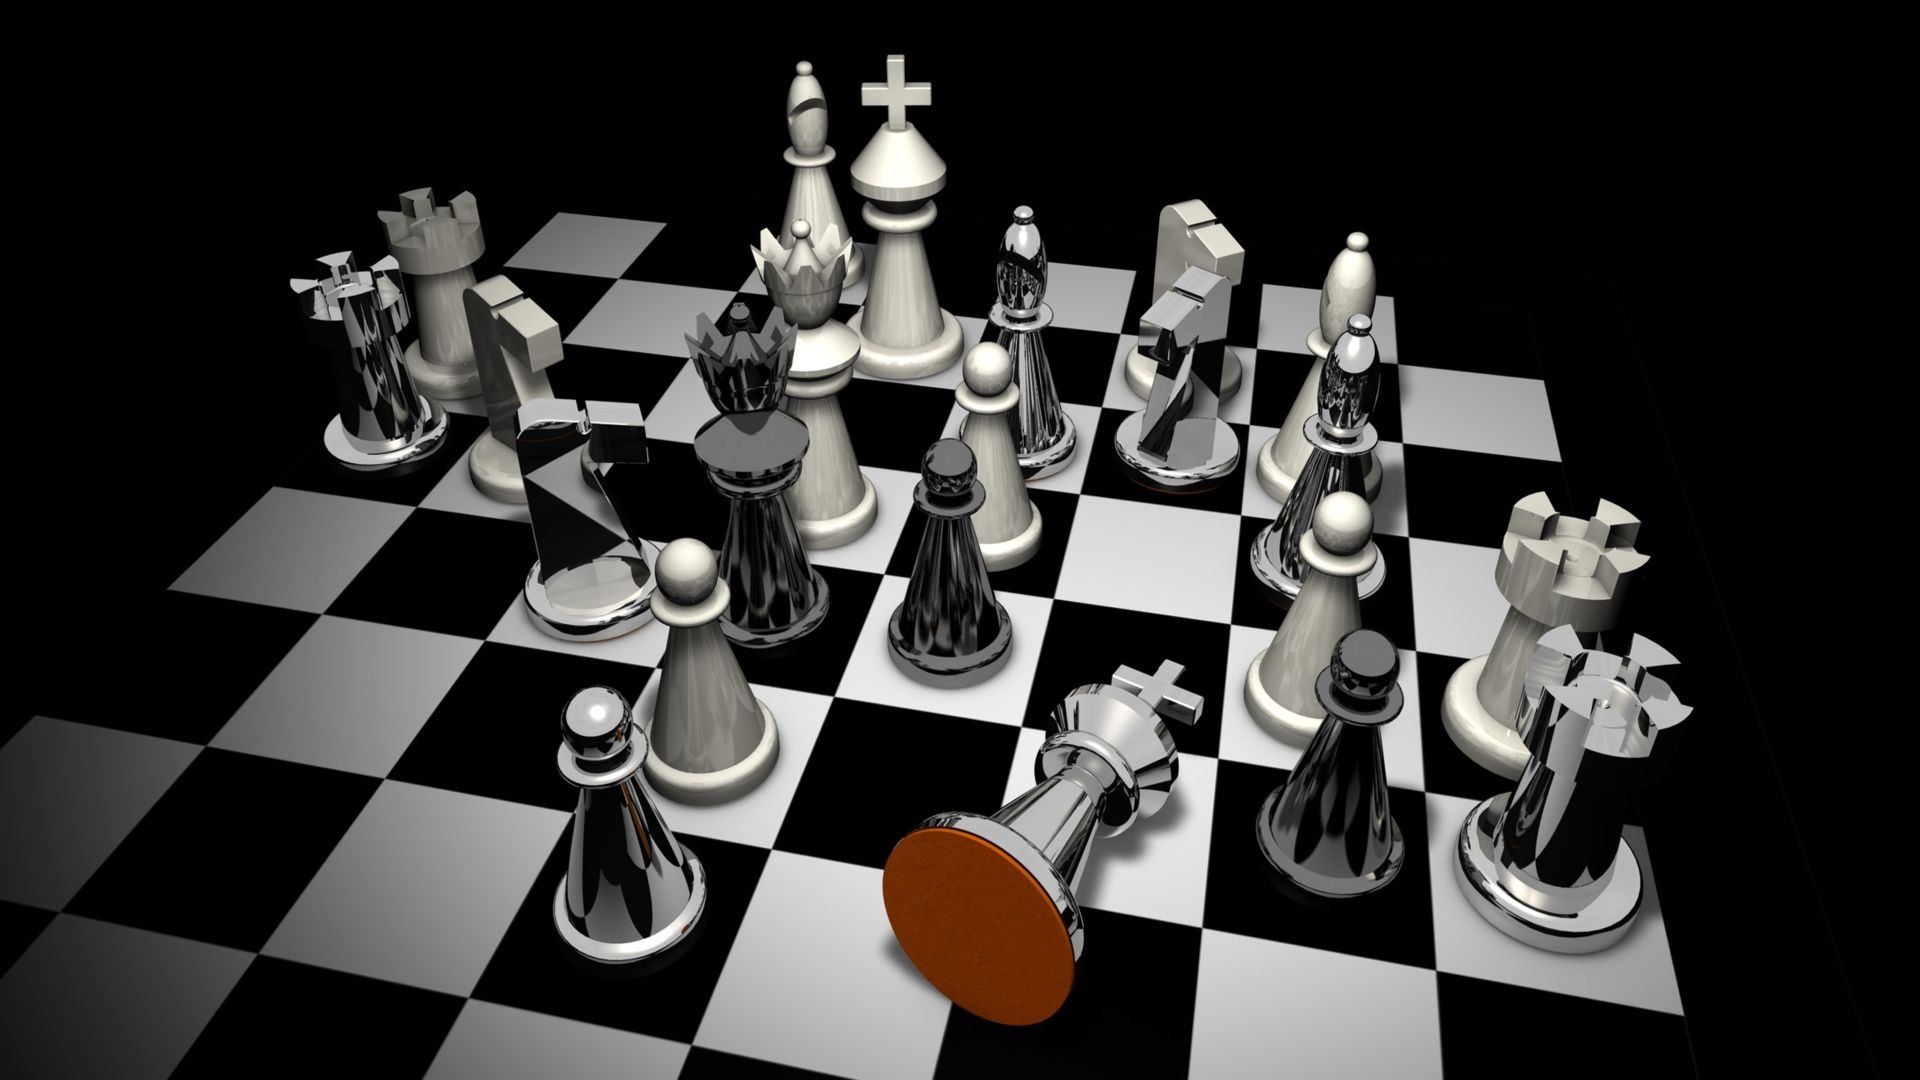 Cool The Priest Invented Folding Chess Board?! + Chess Wallpaper!